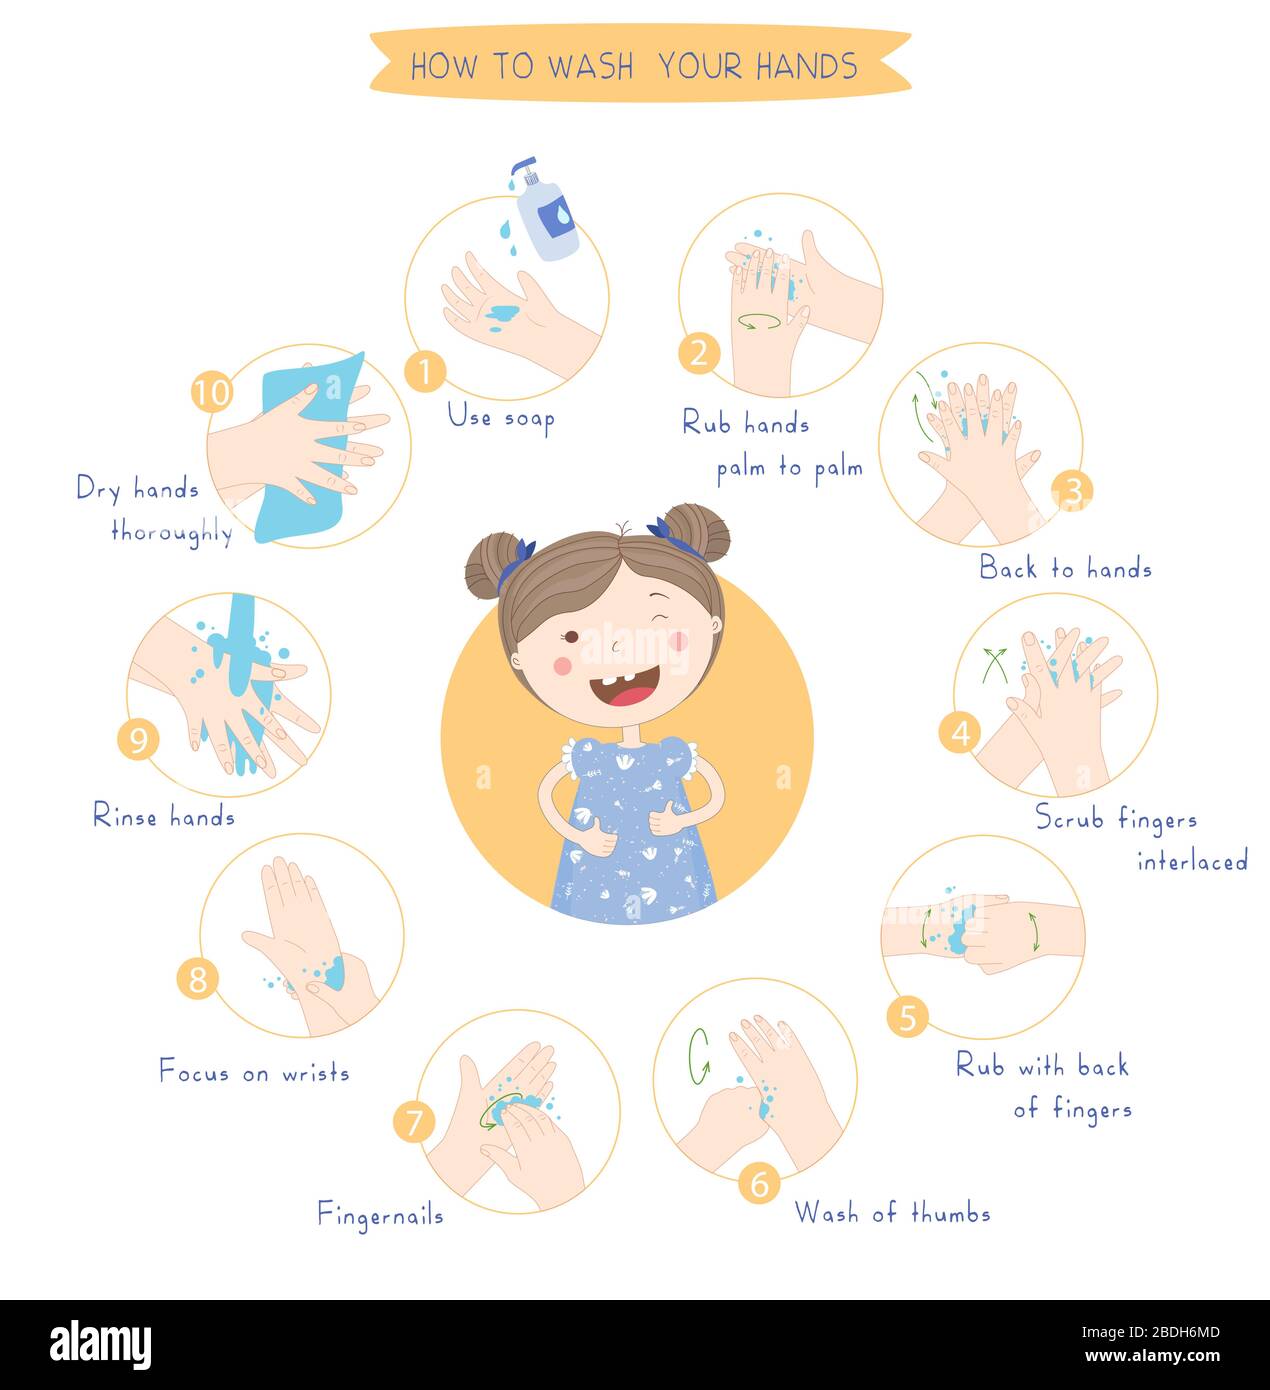 Stages proper care of hands, washing, preventive maintenance of bacteria, healthcare, health. Hand washing, disinfection, sanitary hygiene. Hand hygie Stock Vector